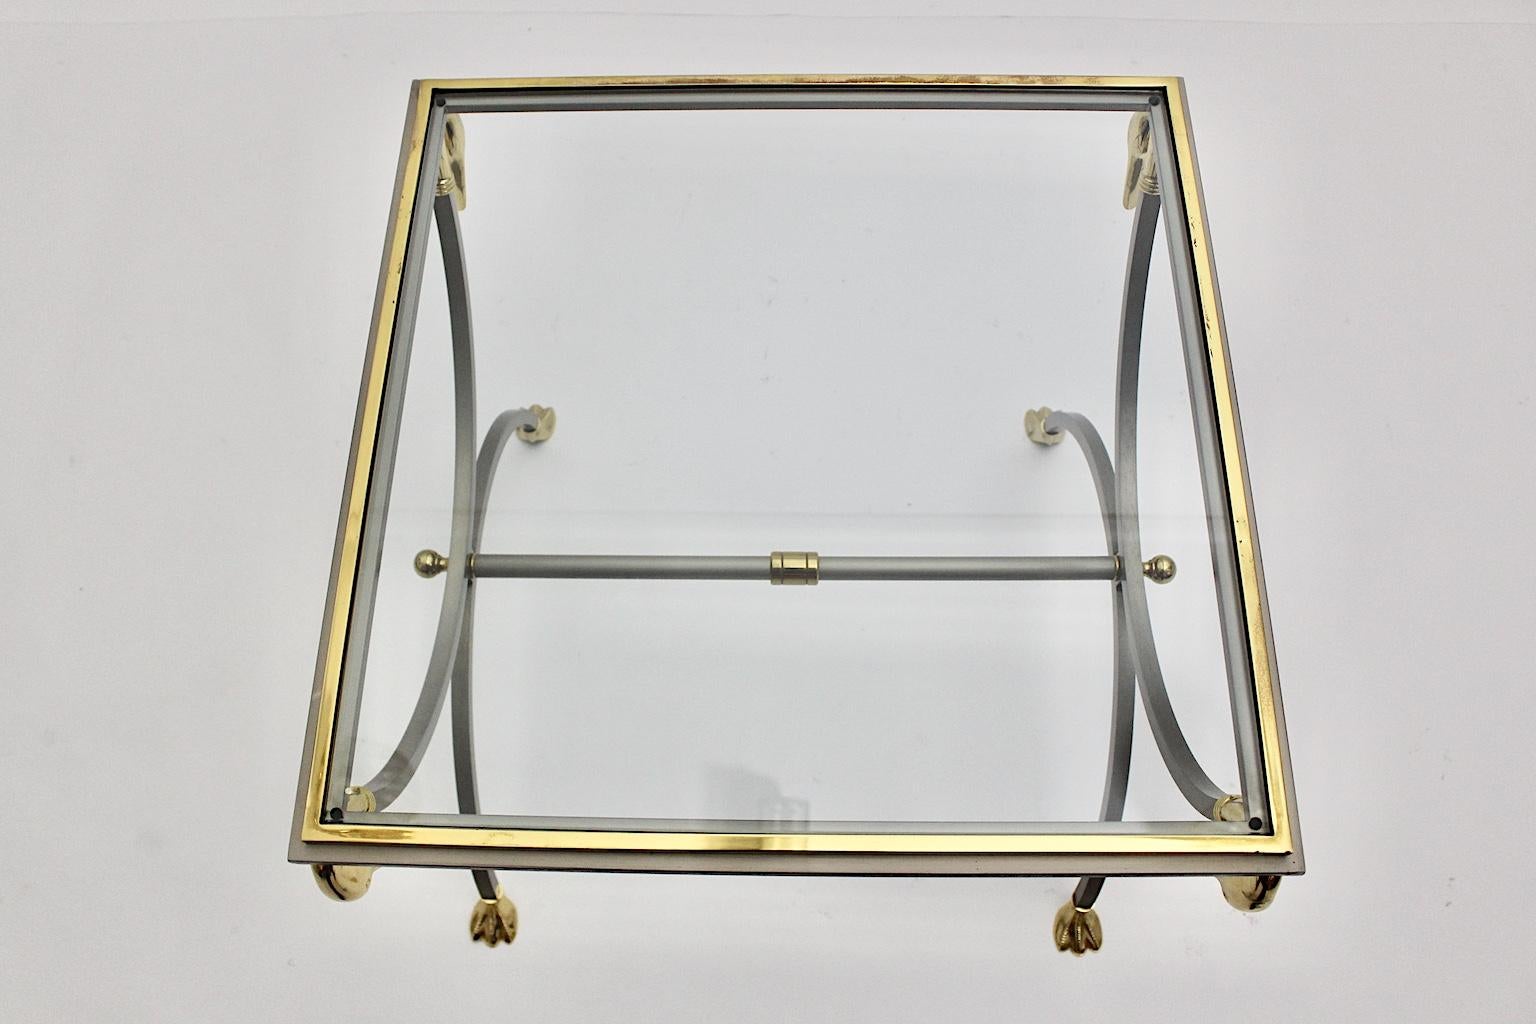 Brushed Maison Jansen Vintage Gold Stainless Steel Coffee Table circa 1970 France For Sale